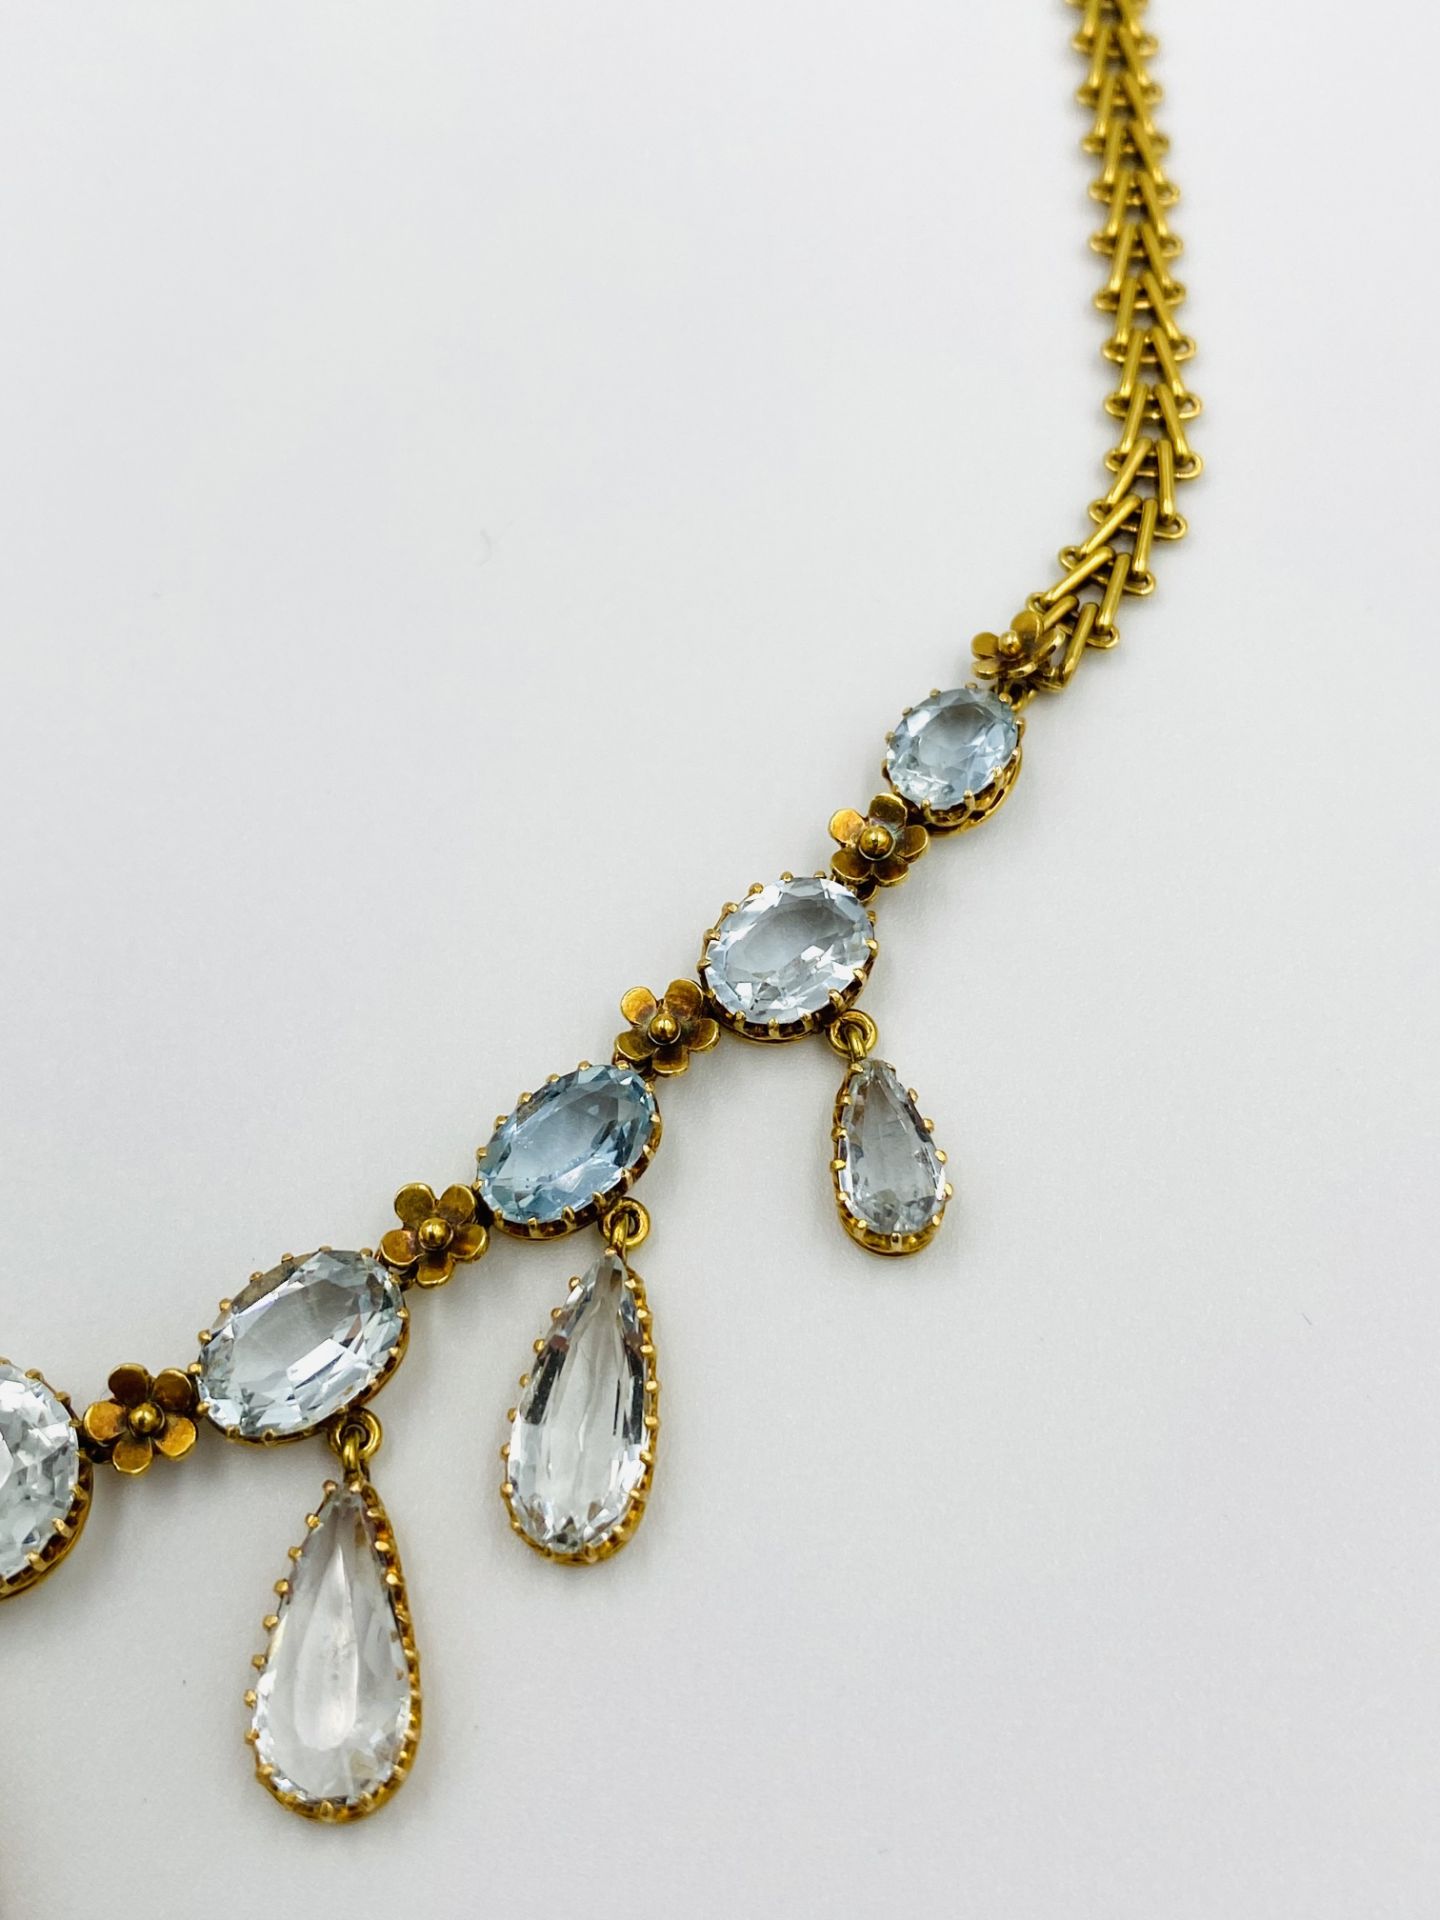 18ct gold and aquamarine necklace by Mrs. Newman - Image 4 of 6